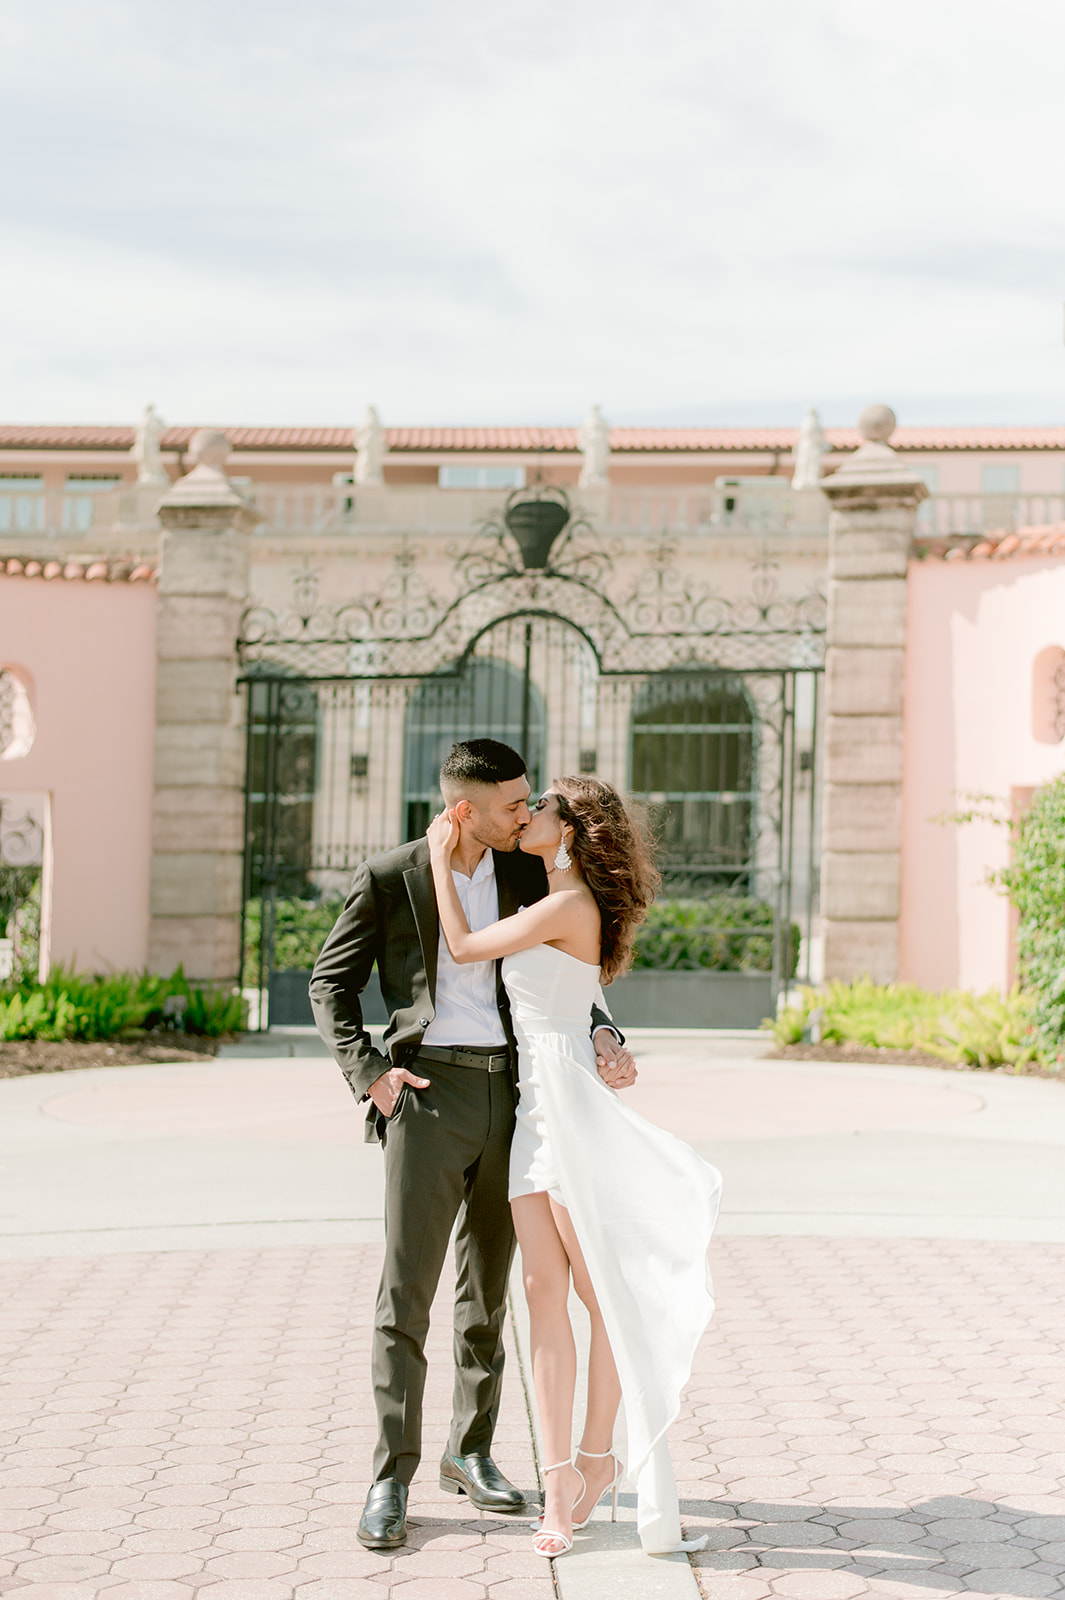 "Elegant and beautiful Ringling Museum engagement session with stunning Indian couple in romantic setting"
